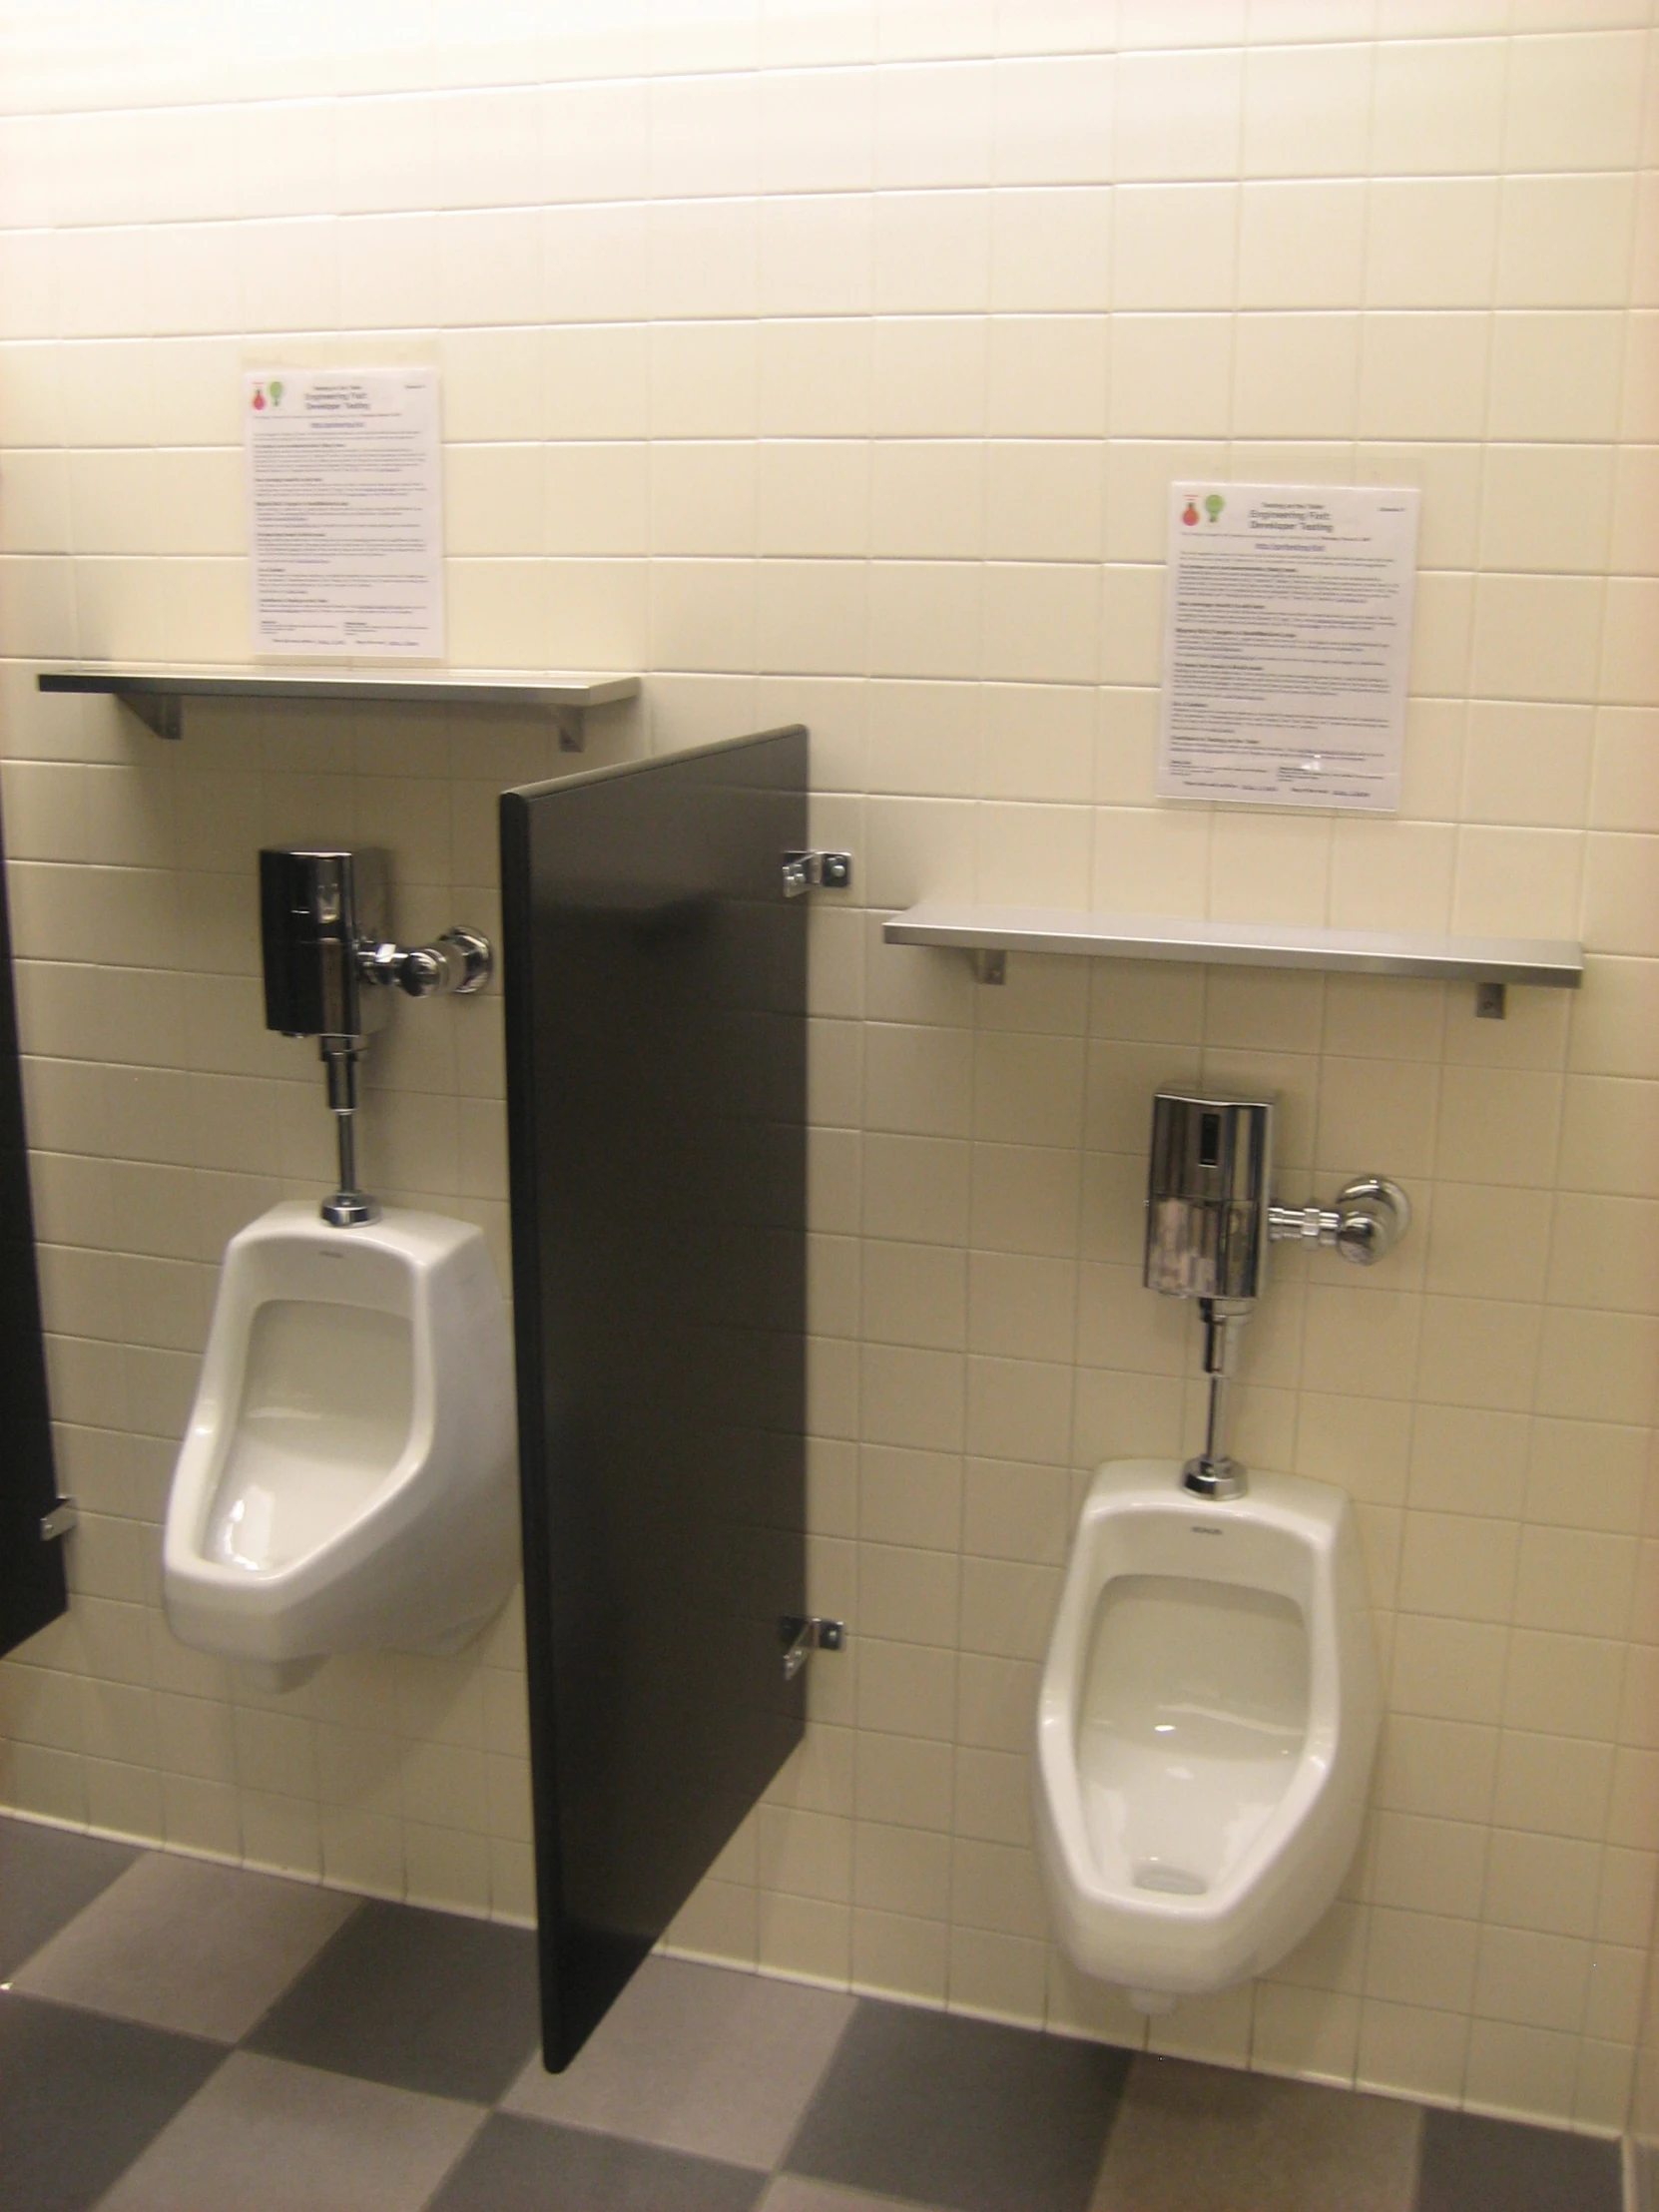 this is a po of urinals in a public restroom